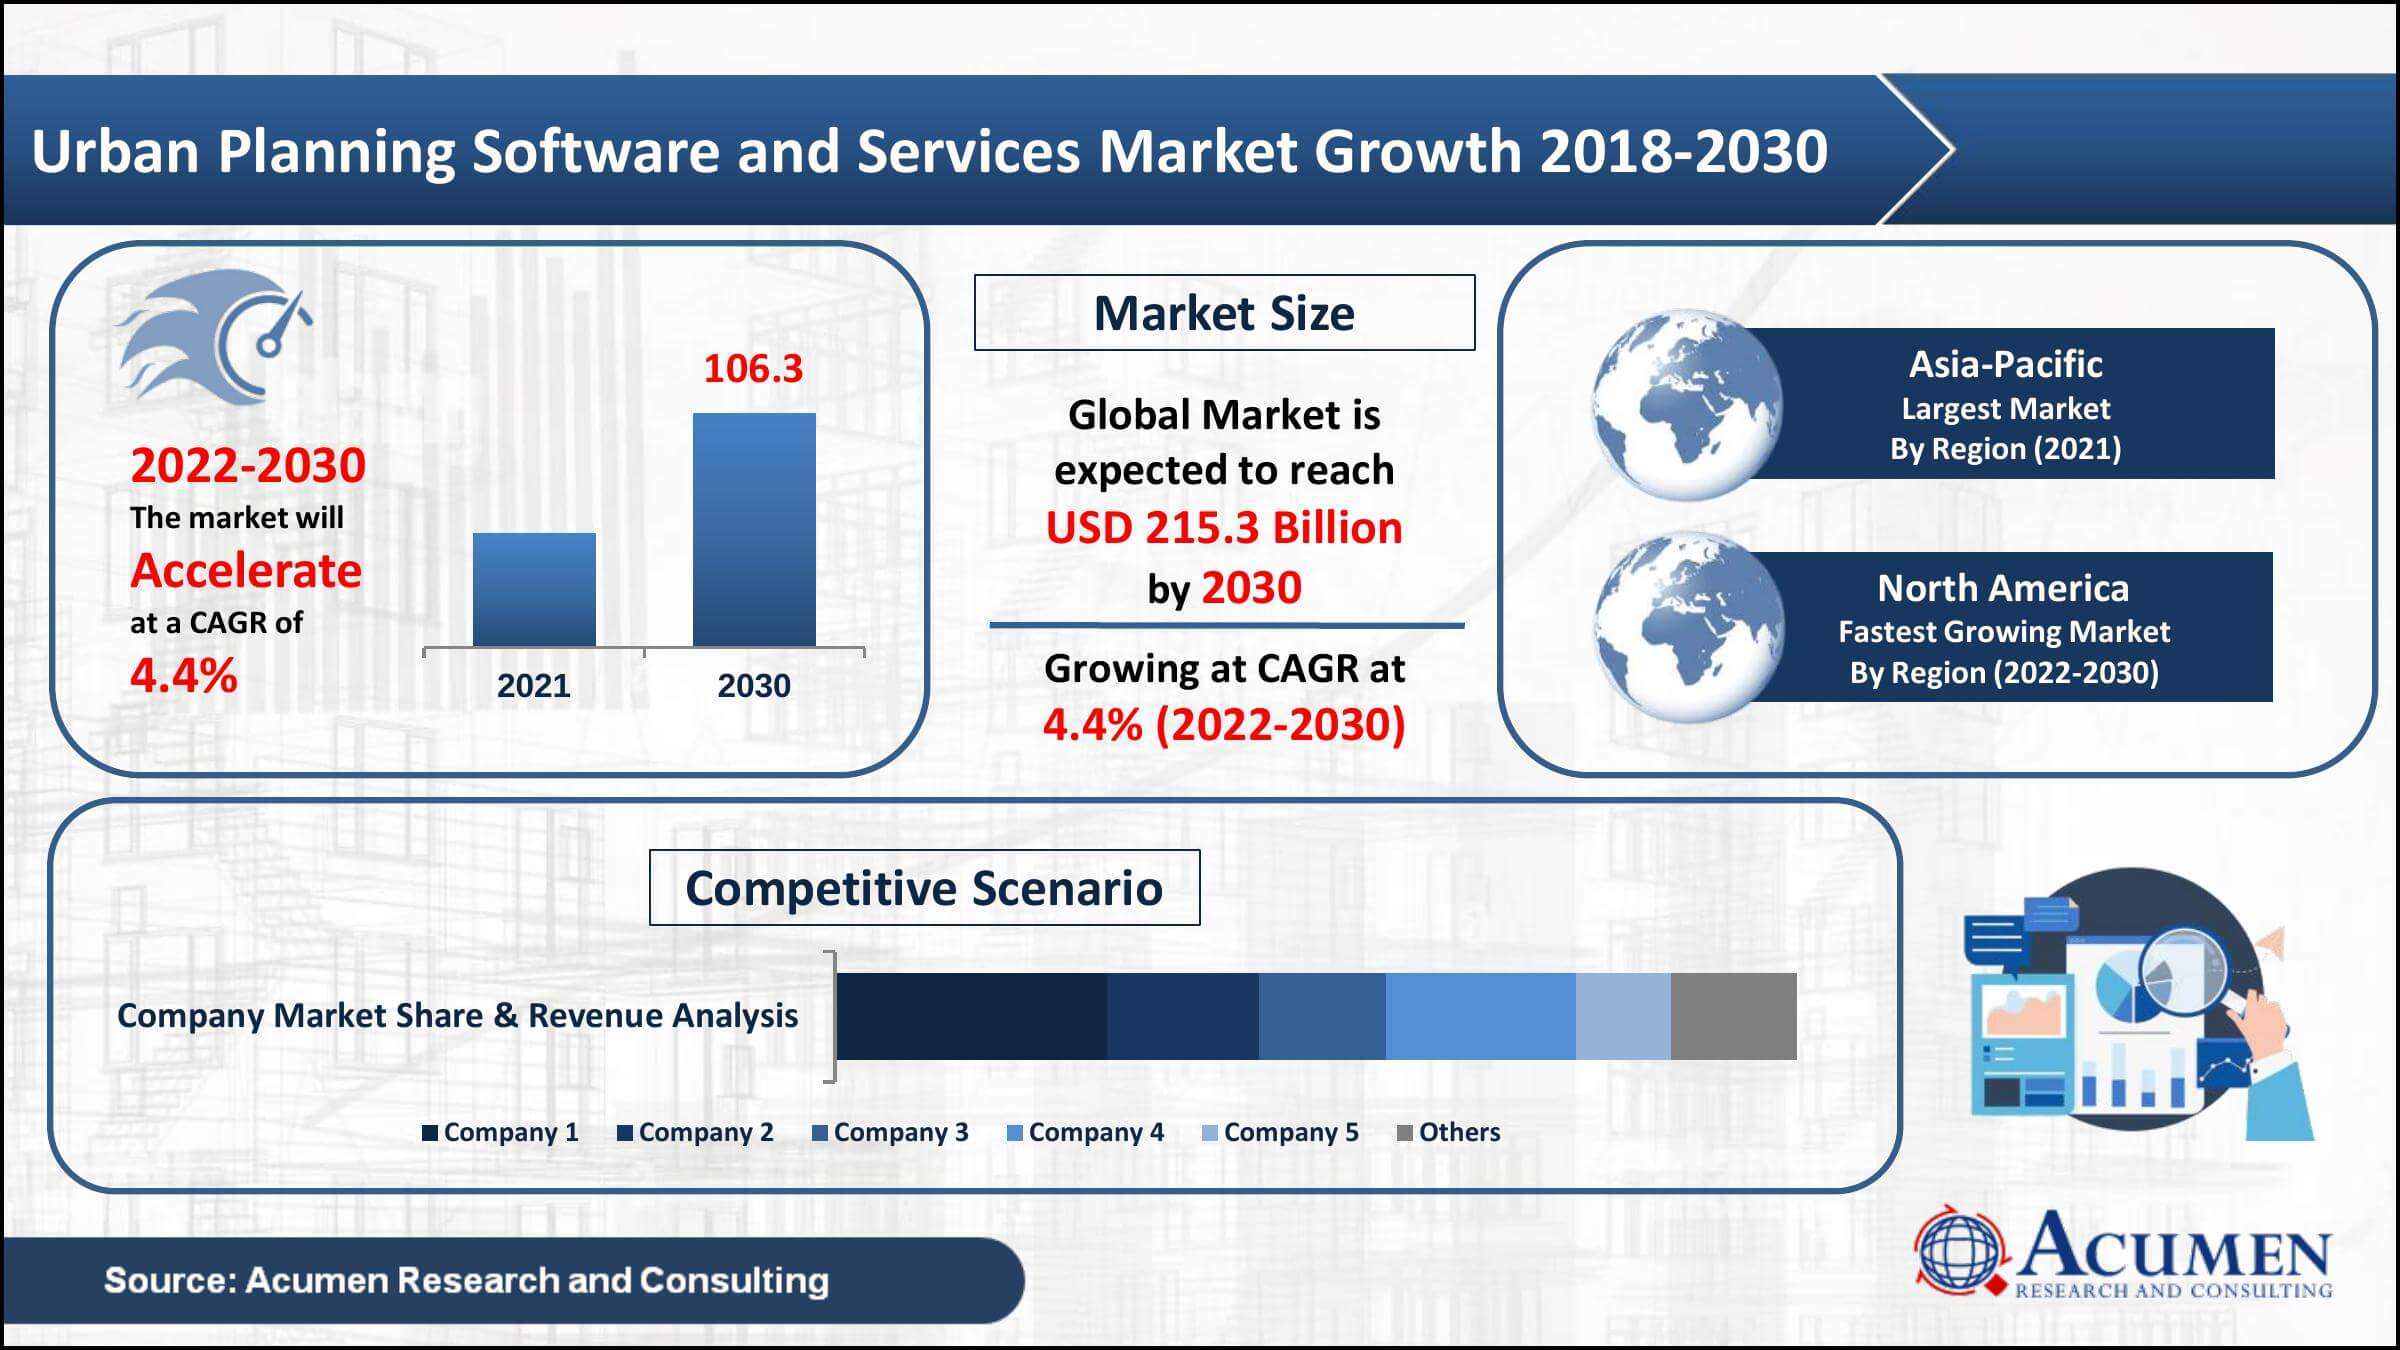 Global urban planning software and services market value collected USD 145.8 Billion in 2021, with a 4.4% CAGR between 2022 and 2030